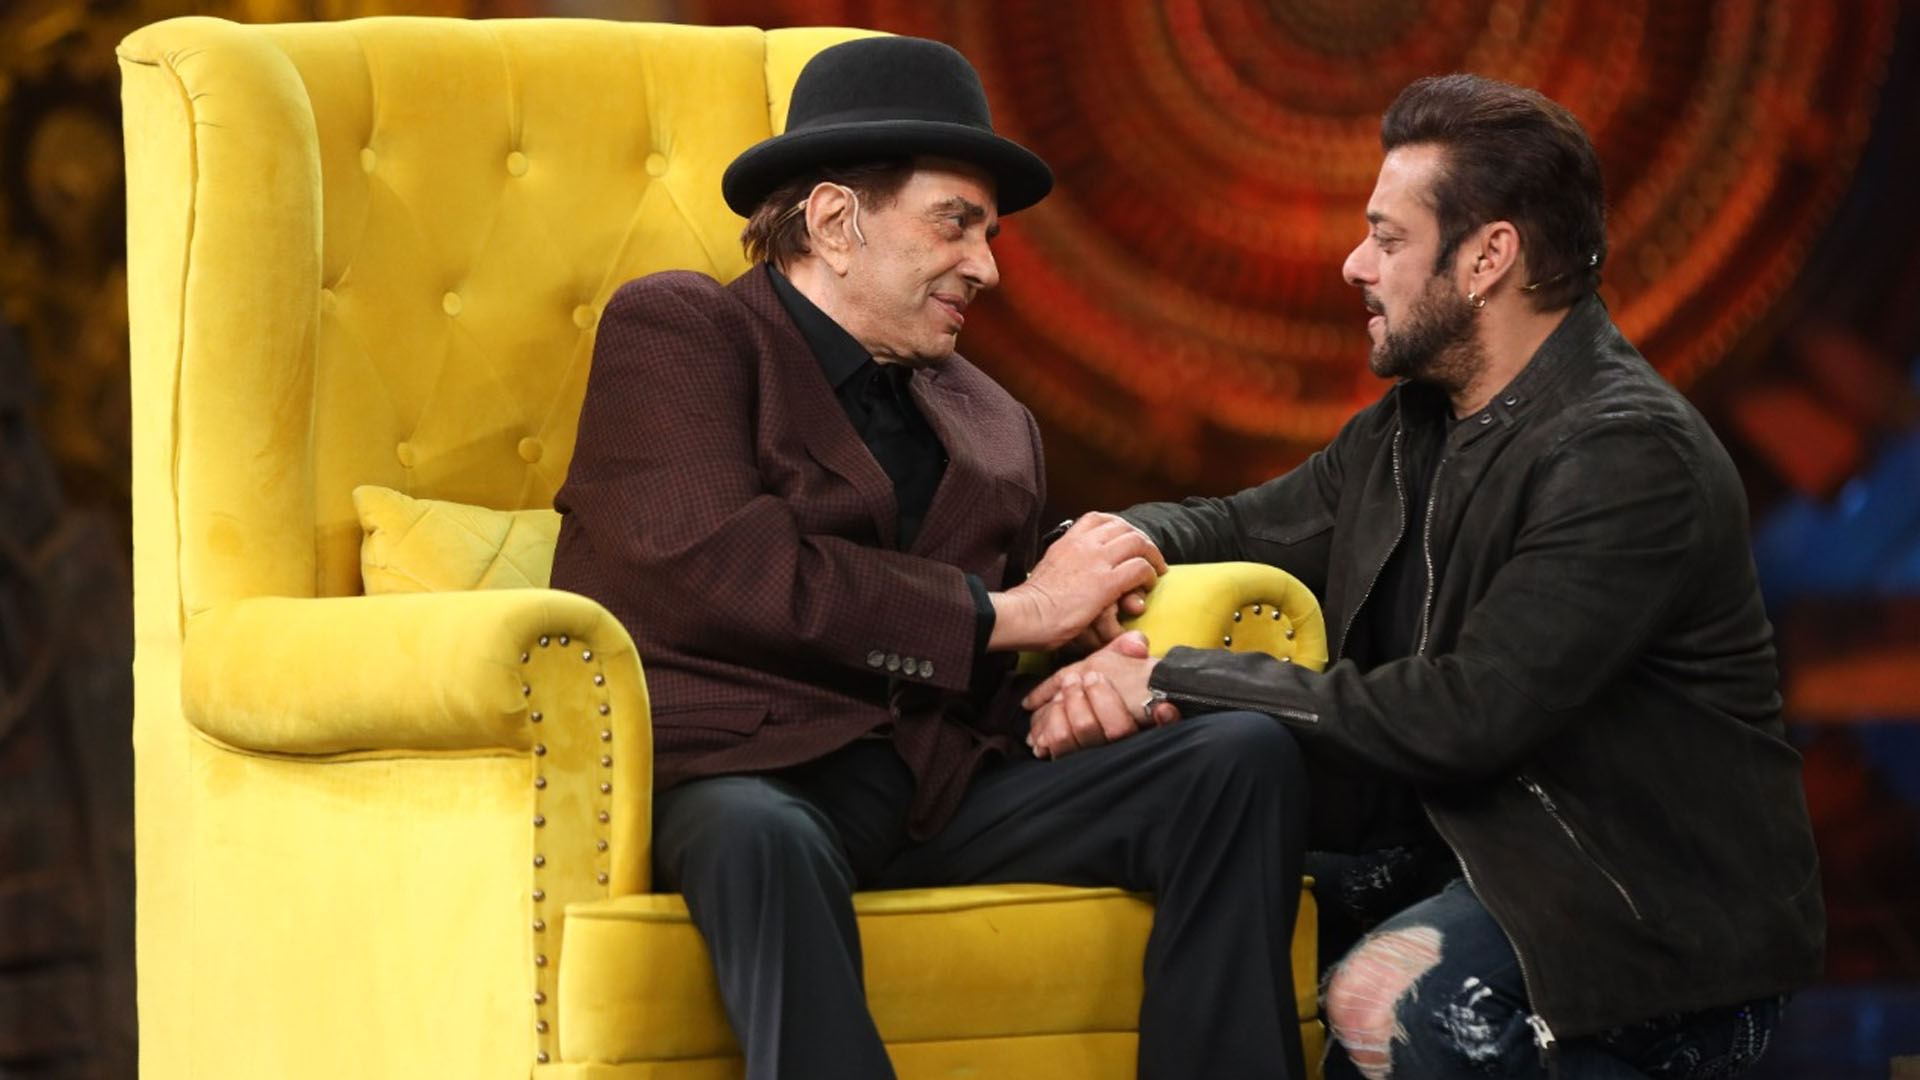 The house of COLORS’ ‘Bigg Boss 16’ reverberates with laughter and shayris as Bollywood veteran Dharmendra graces the Bigg boss 16 house